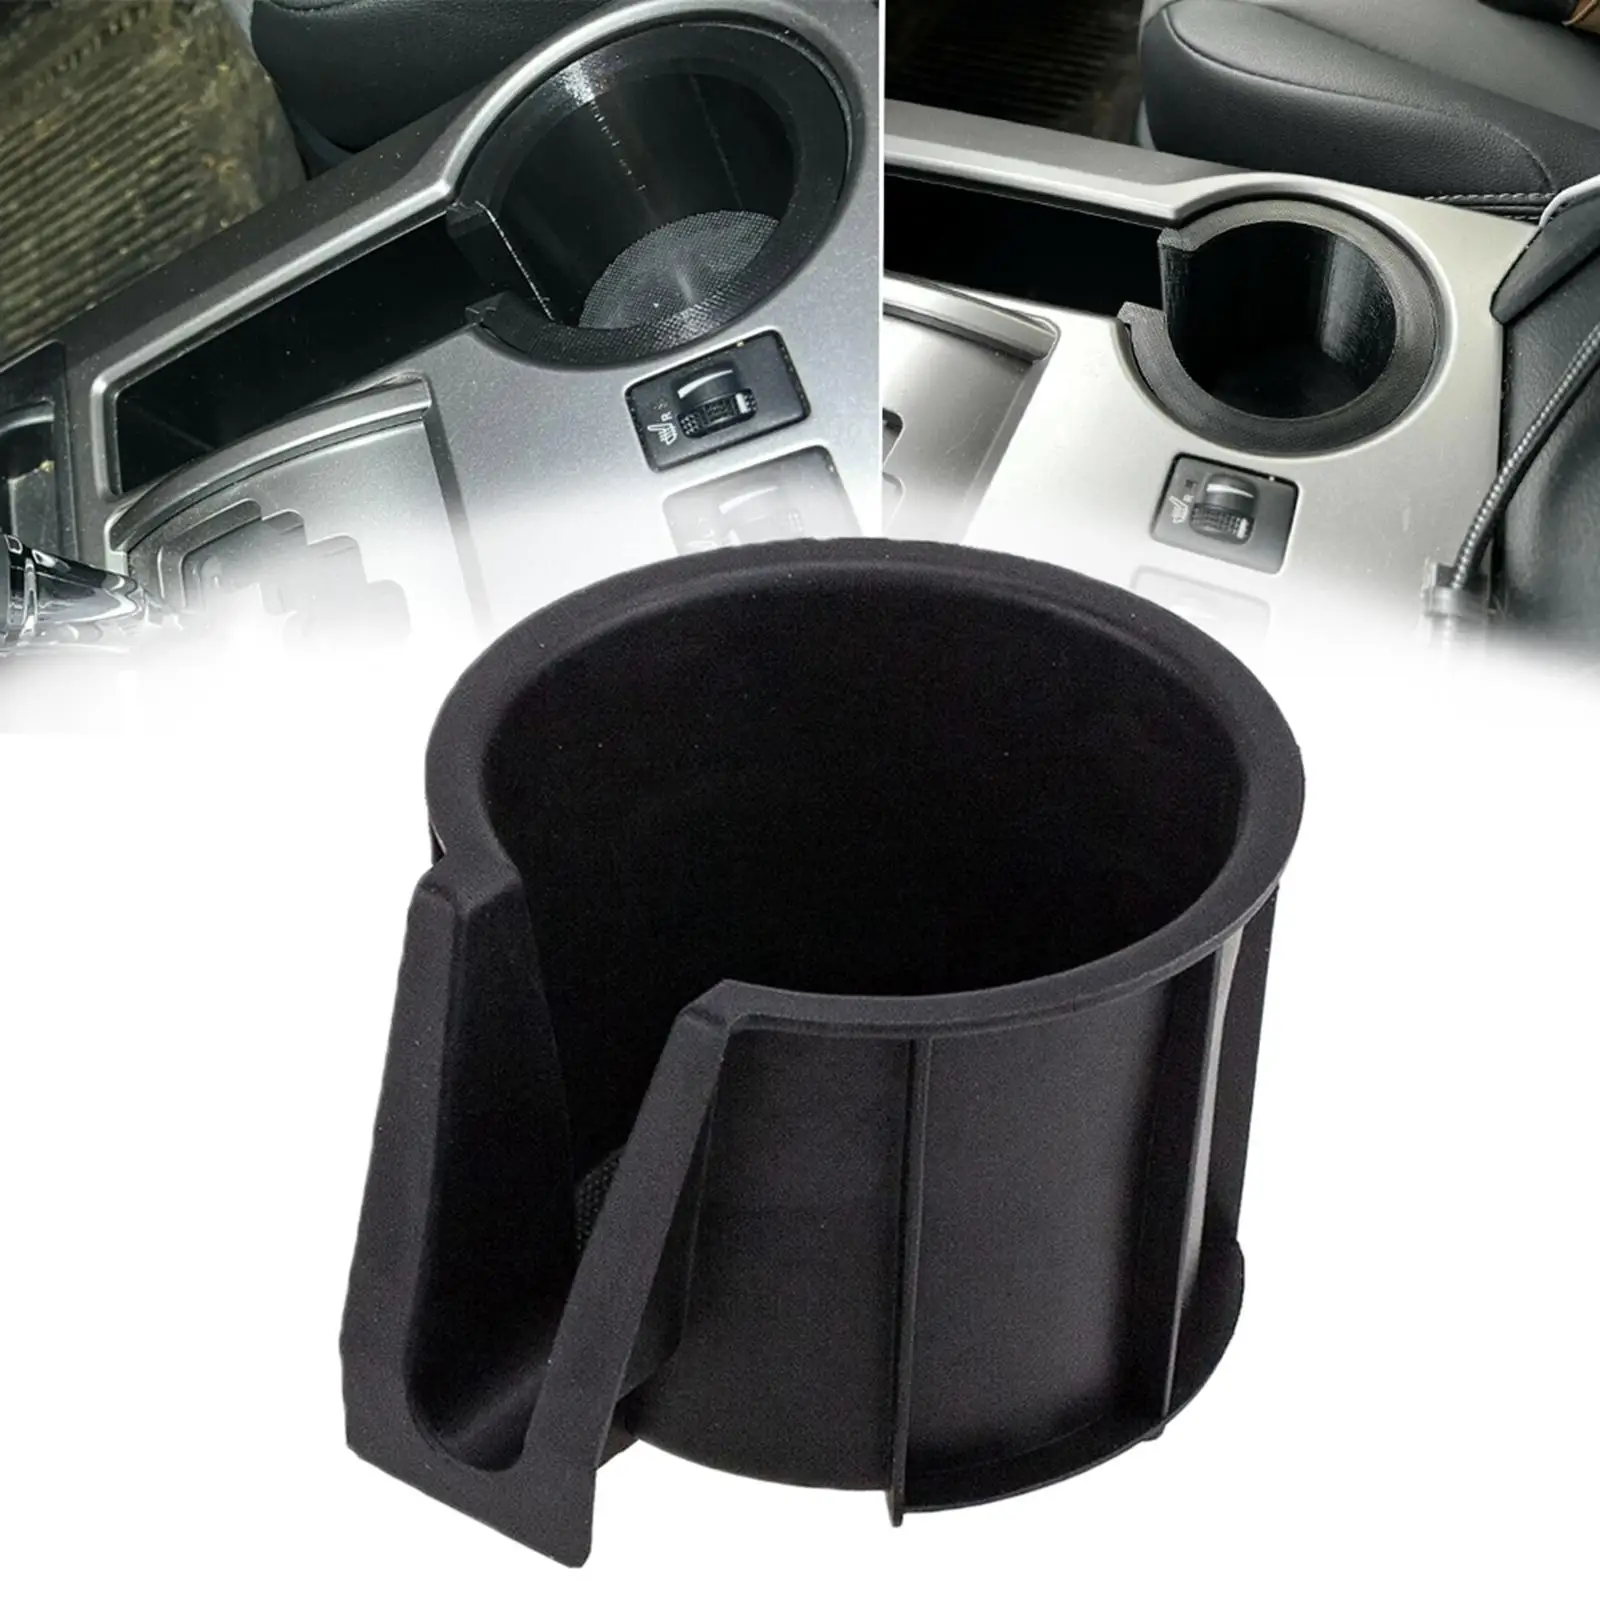 Console Cup Holder Insert Accessories Durable Spare Parts Replaces Cup Holder sub Assembly for   2014-2021